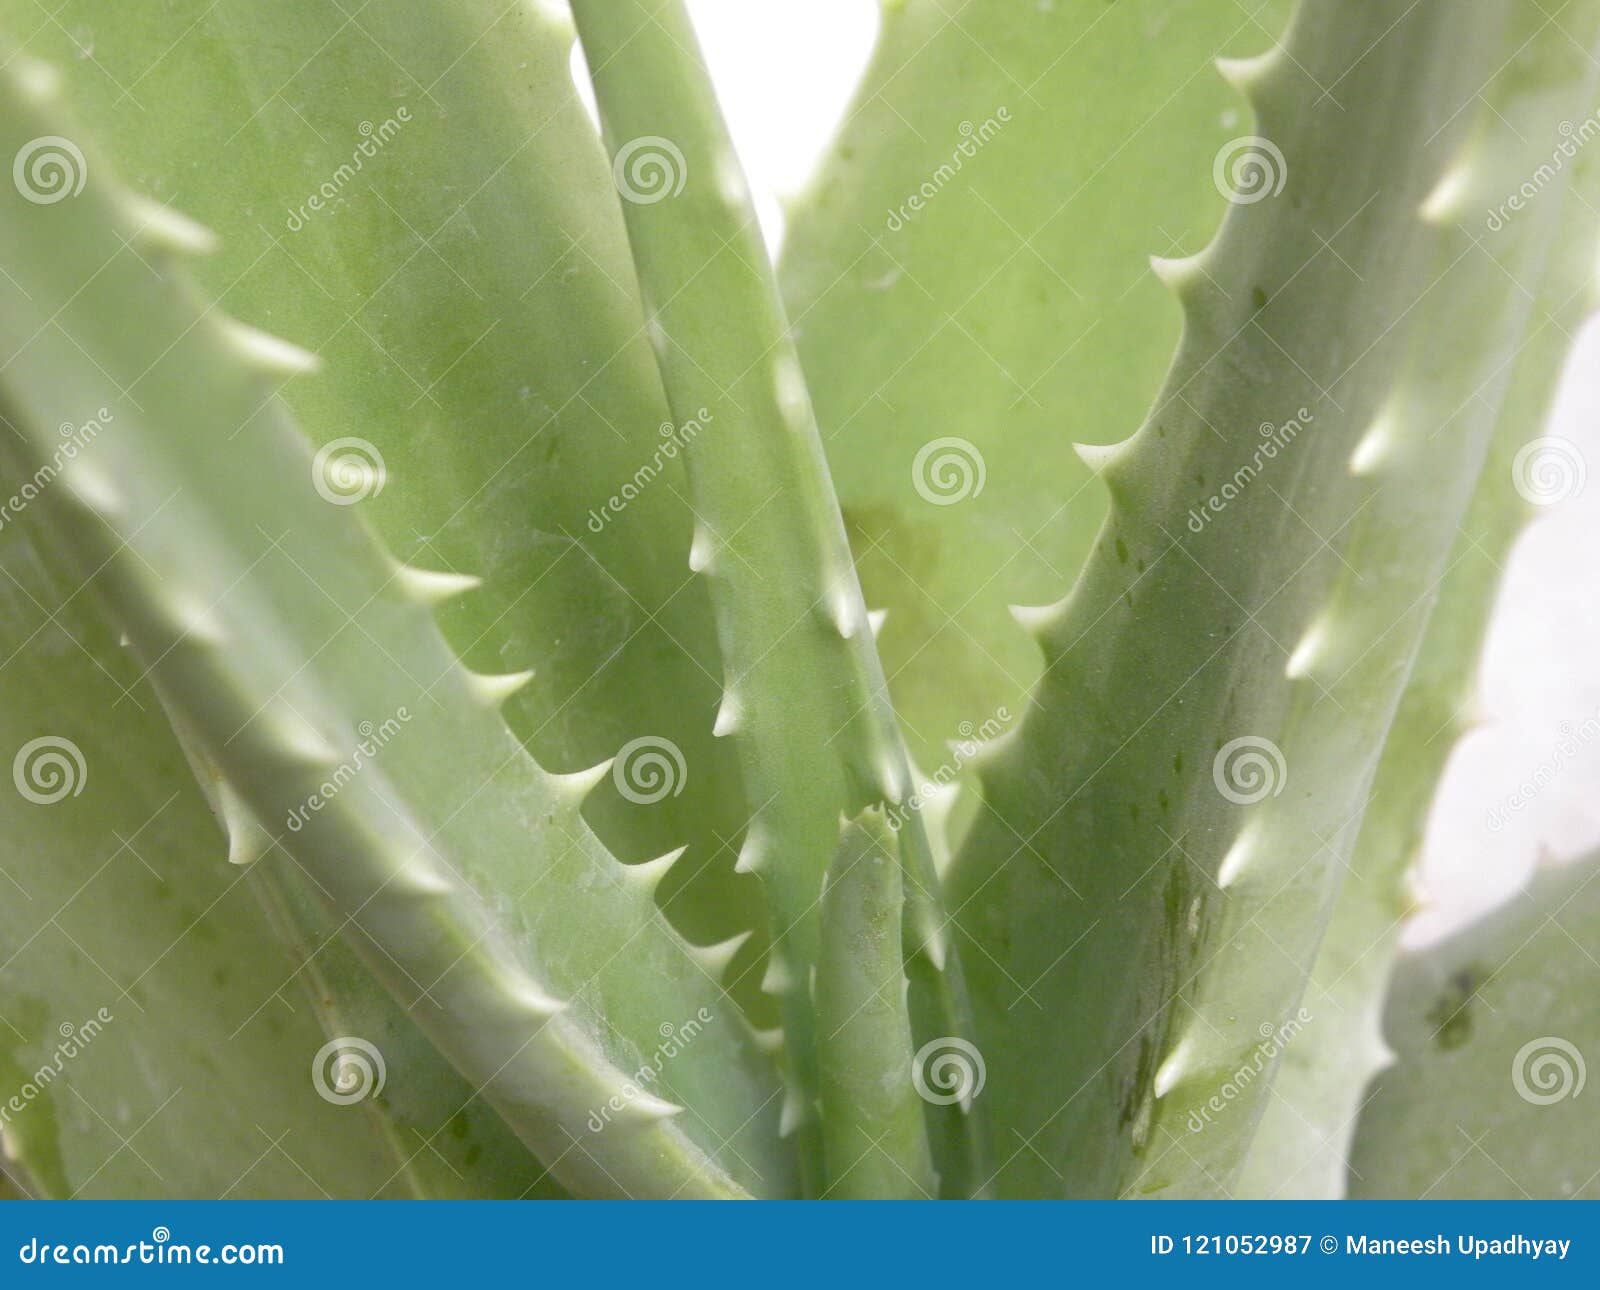 Light Green Color Leaves Of Aloe Vera Plant Stock Image Image Of